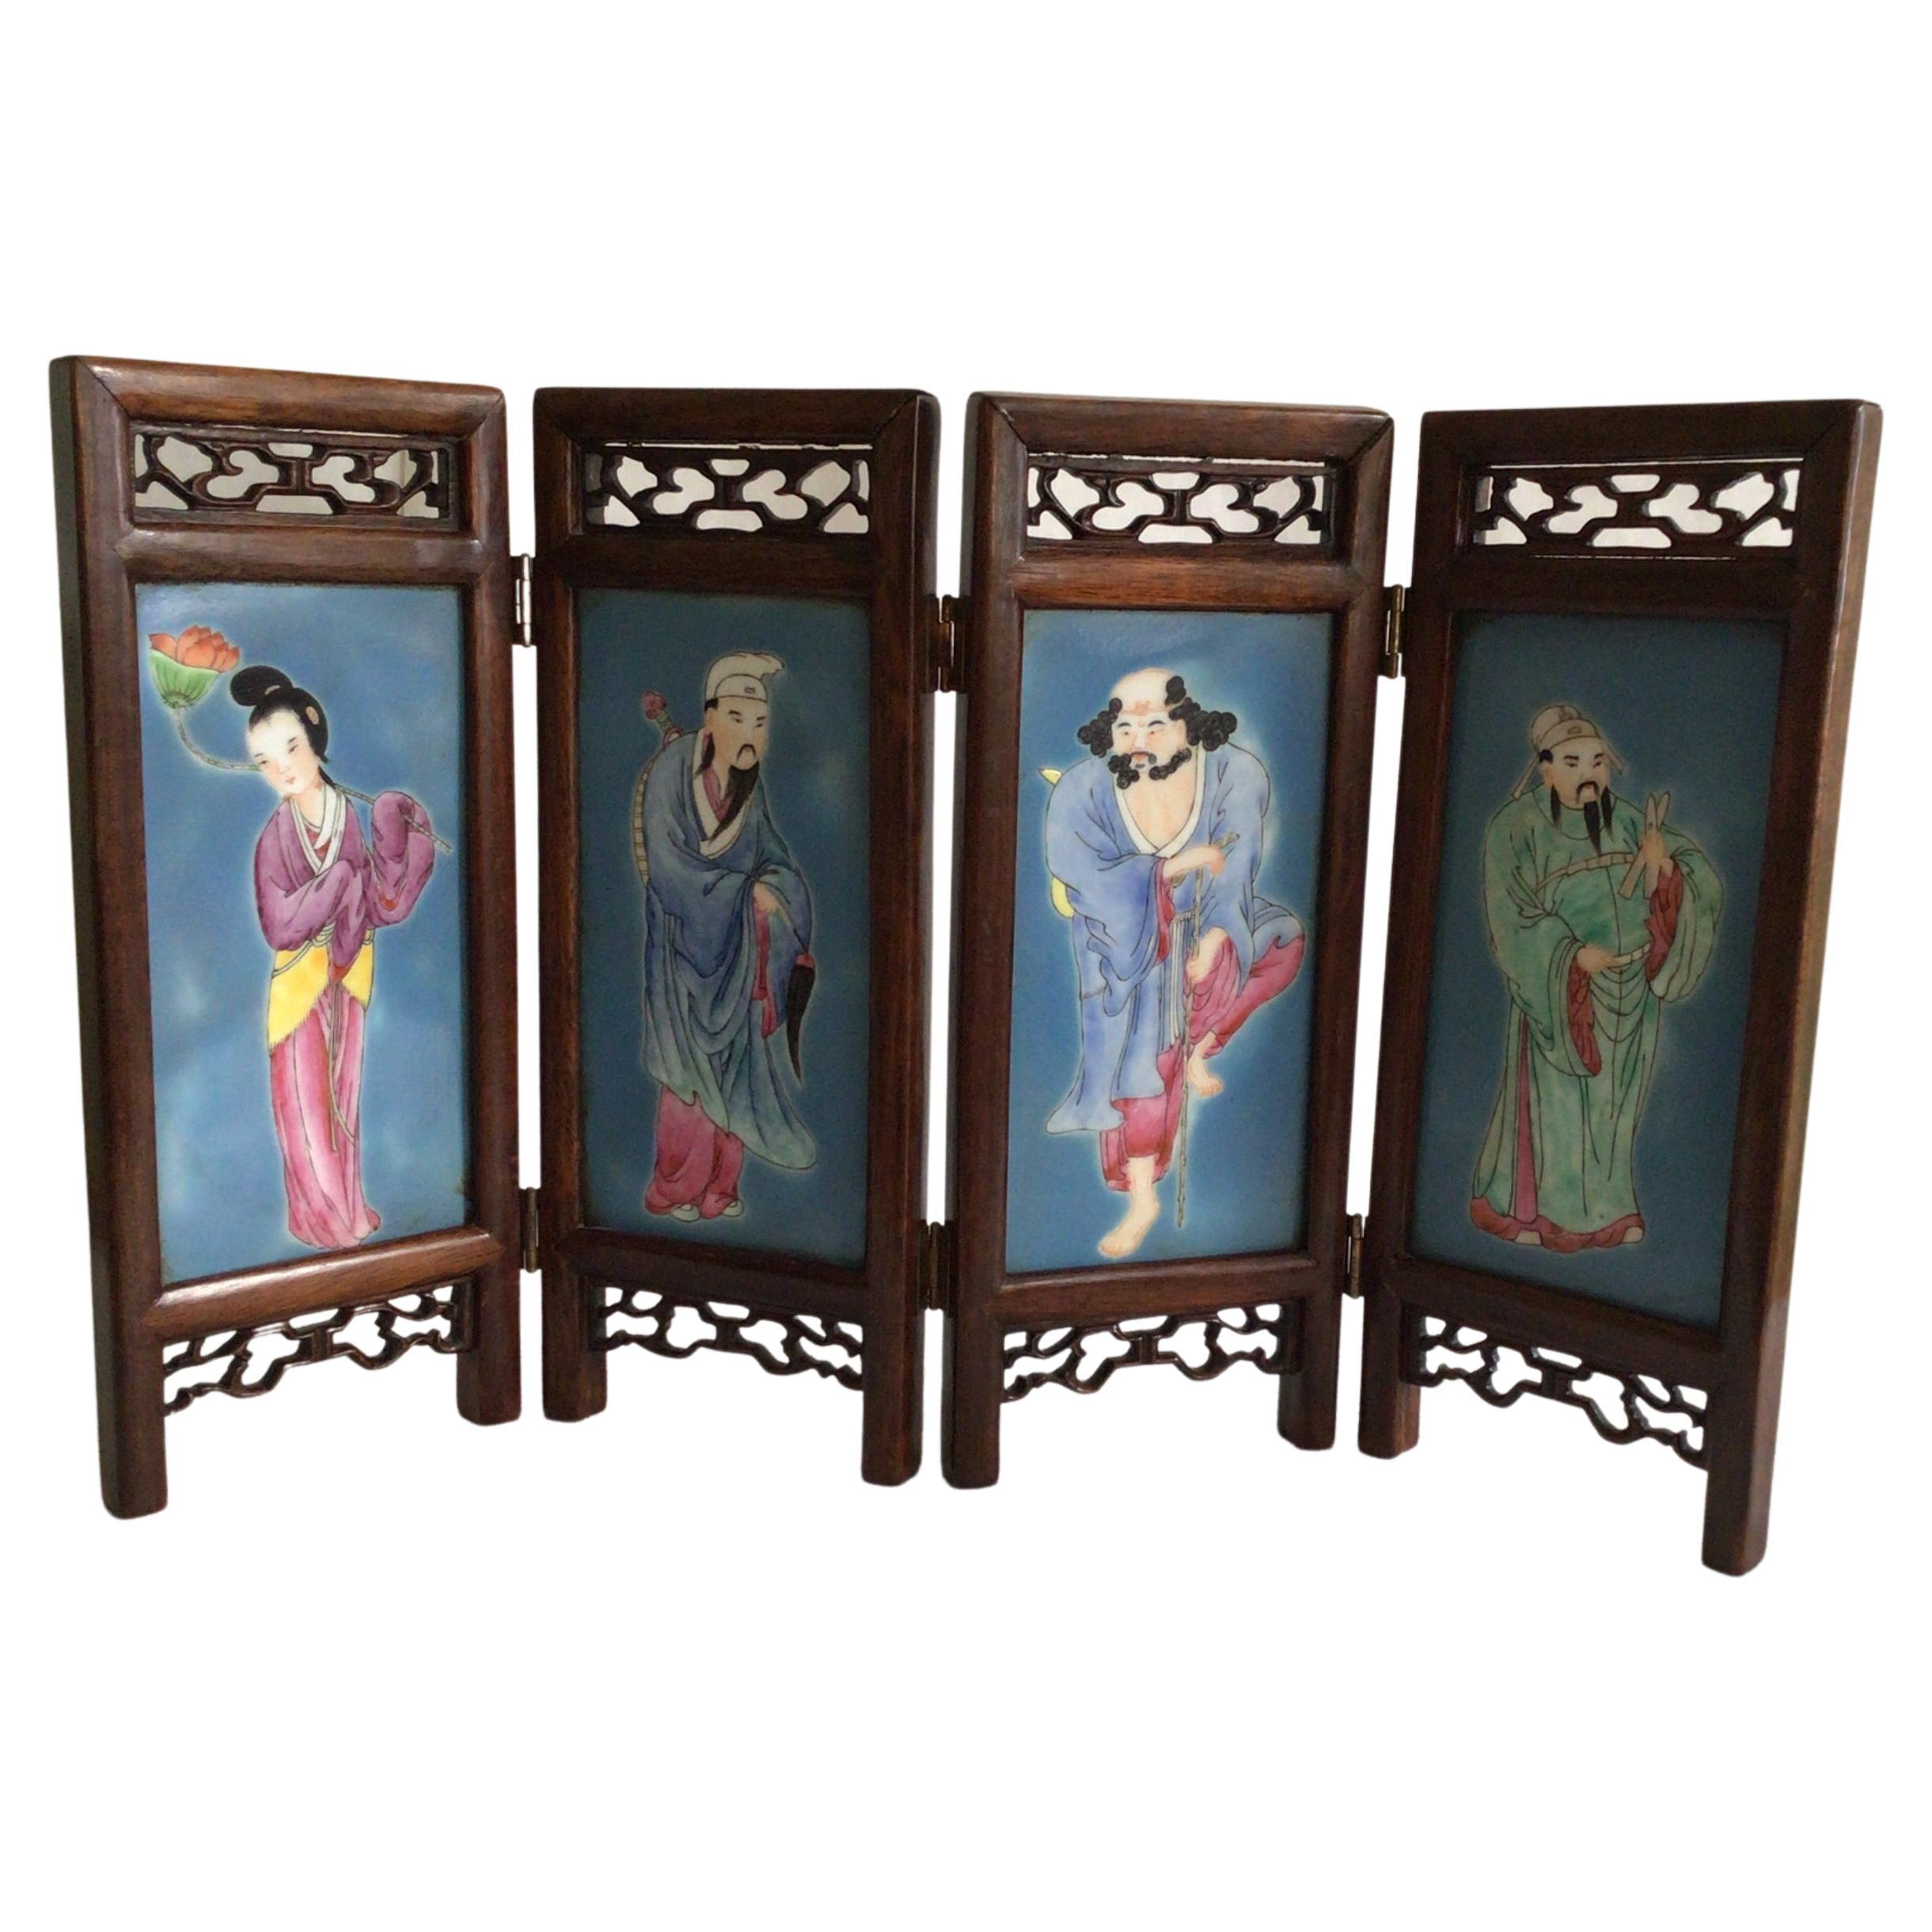 1960s Hand-Painted Wood and Porcelain Tabletop Screen